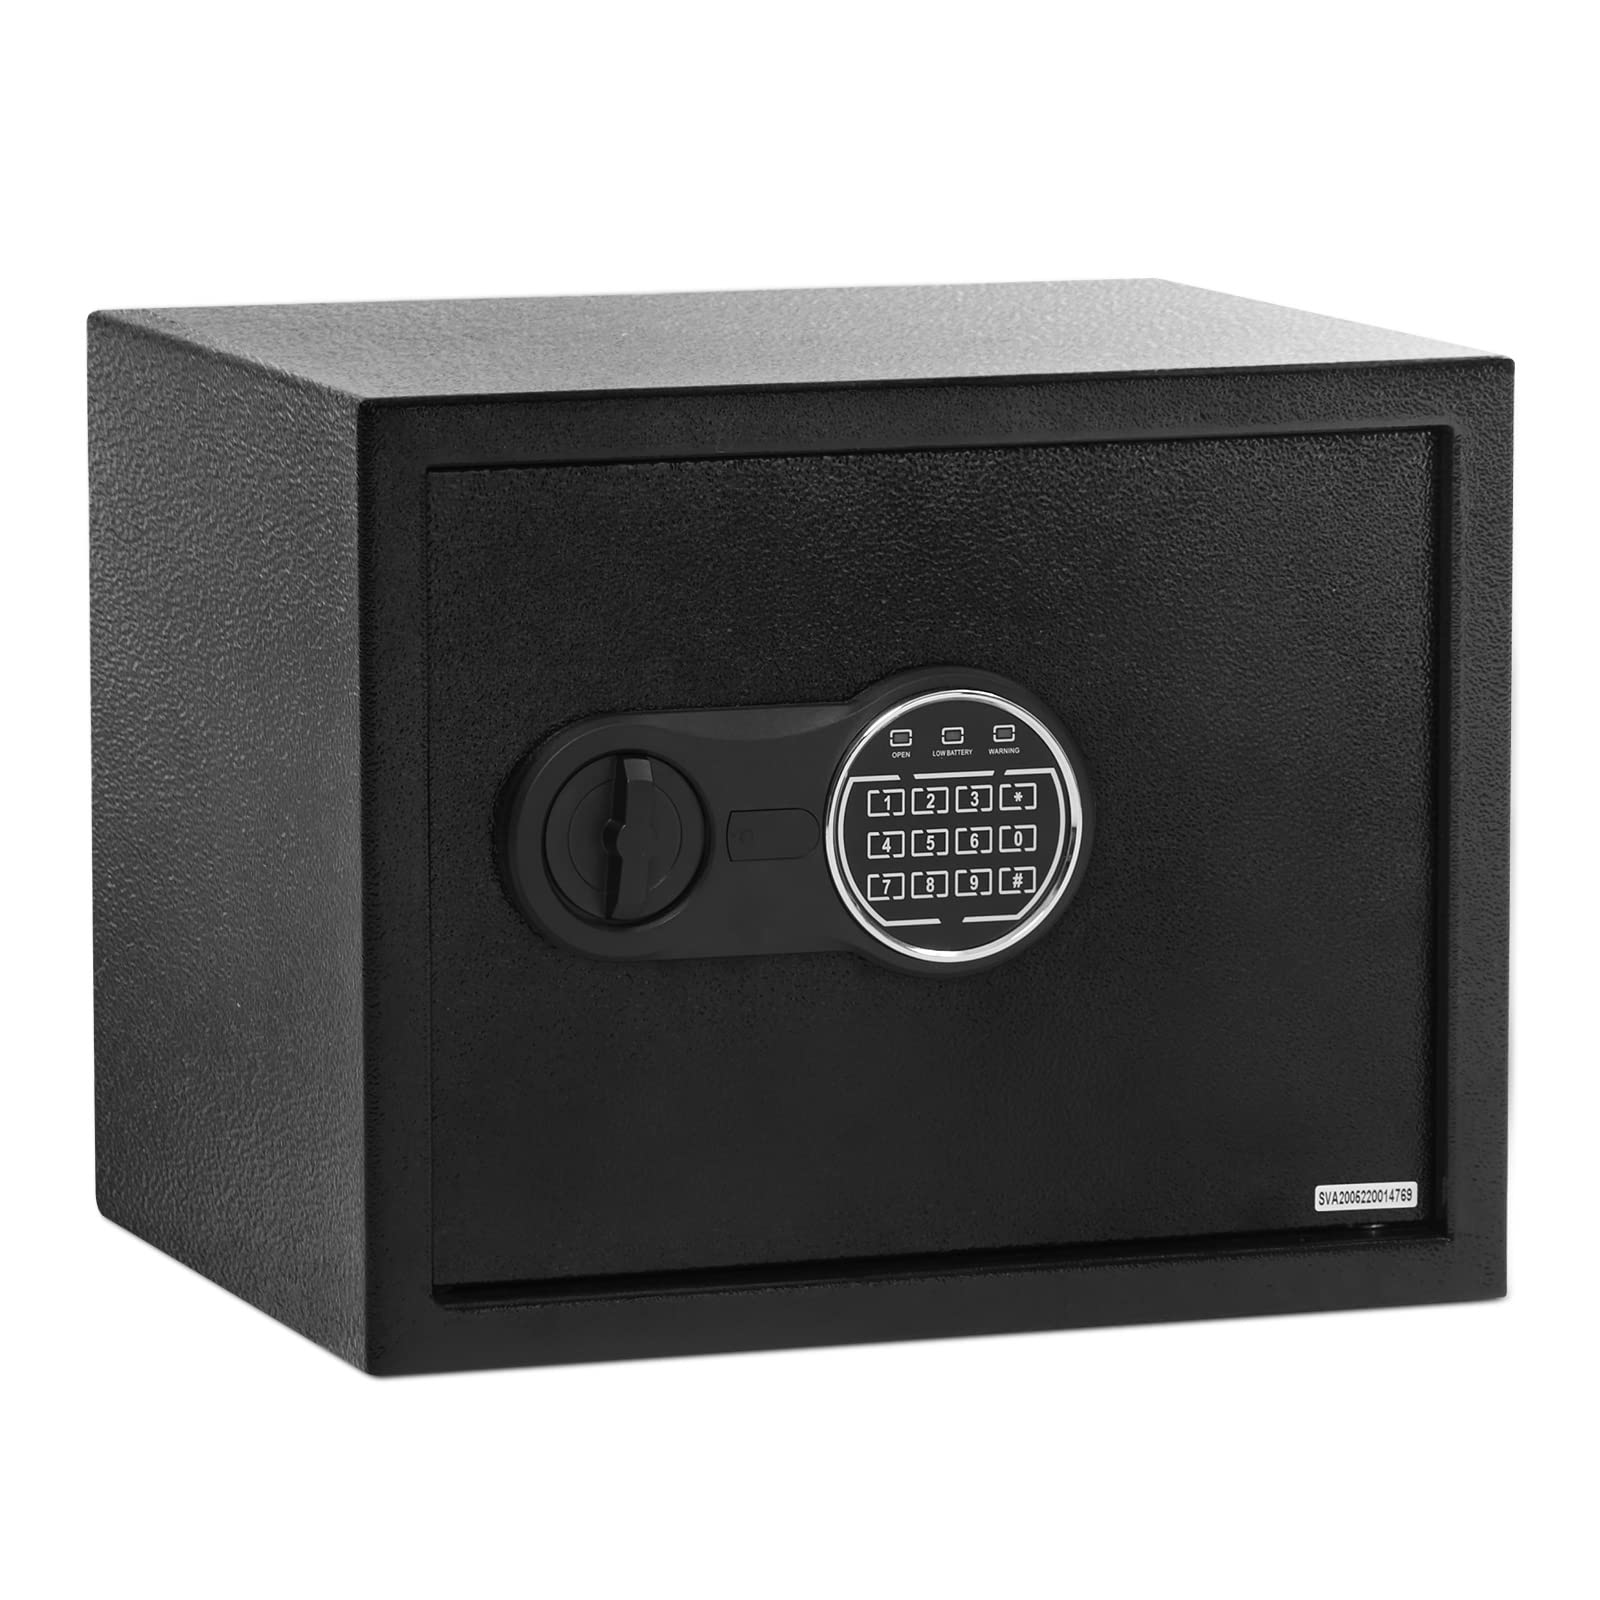 Security Safe with Digital Keypad Lock, 14.9 x 11.8 x 11.8 Inches Steel Safe with Interior Lining and Bolt Down Kit, Secure Documents, Jewelry, and Valuables